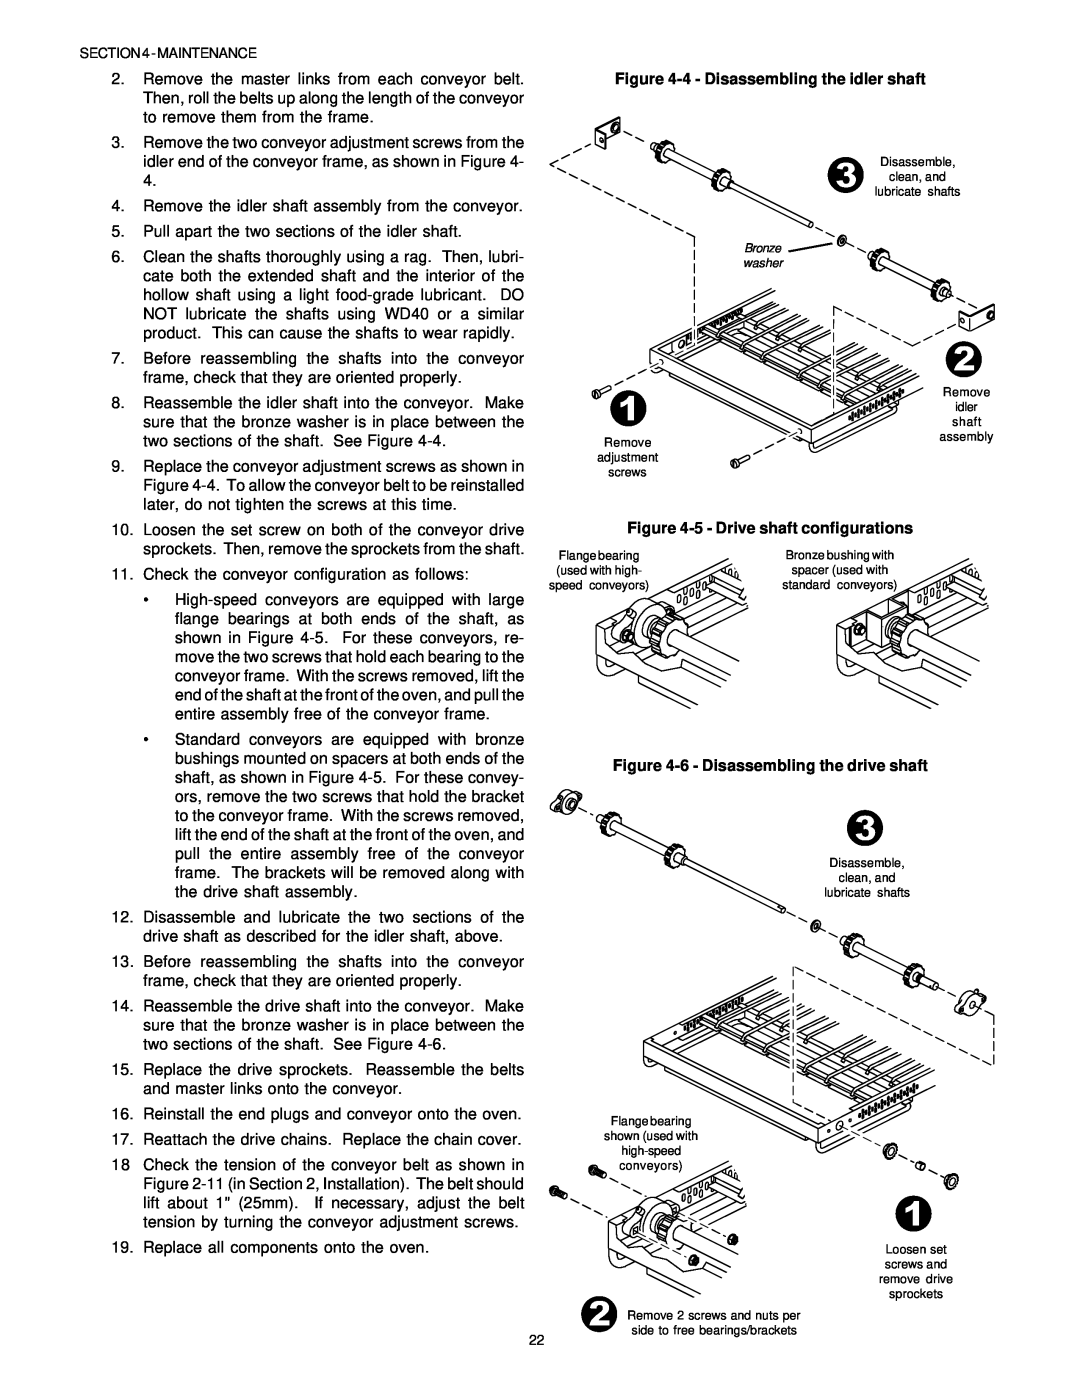 Middleby Marshall PS536GS manual English, 4- Disassembling the idler shaft, 5- Drive shaft configurations 